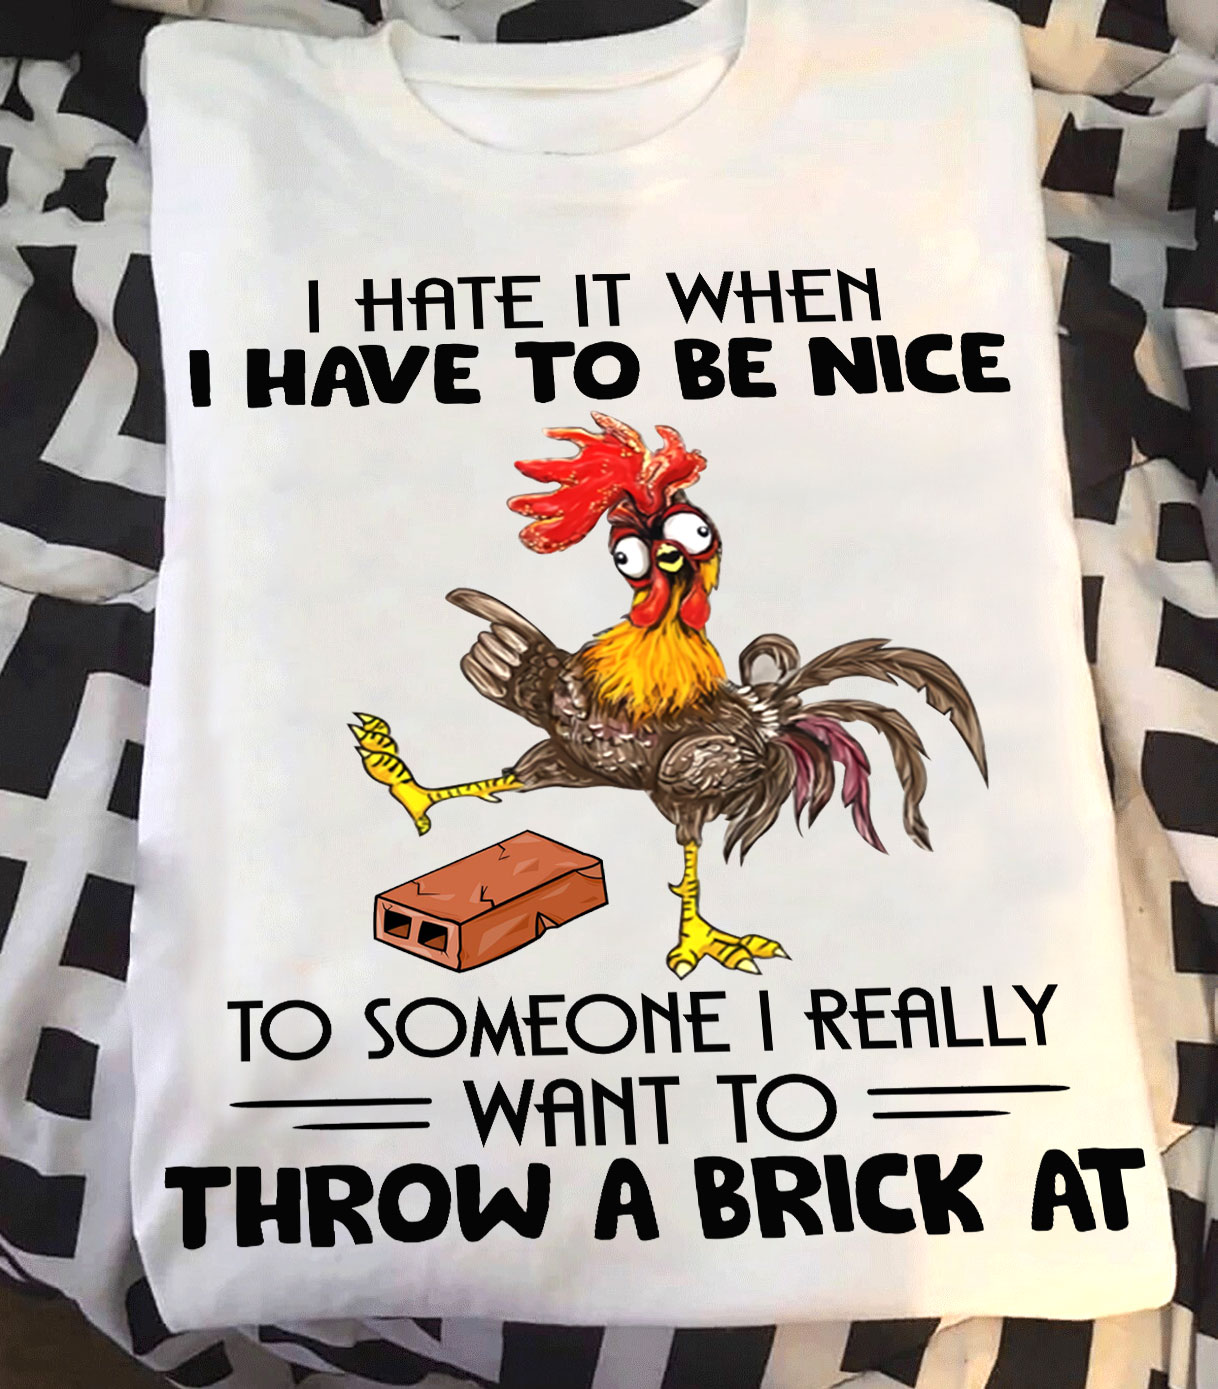 I hate it when I have to be nice to someone - Grumpy chicken with a brick